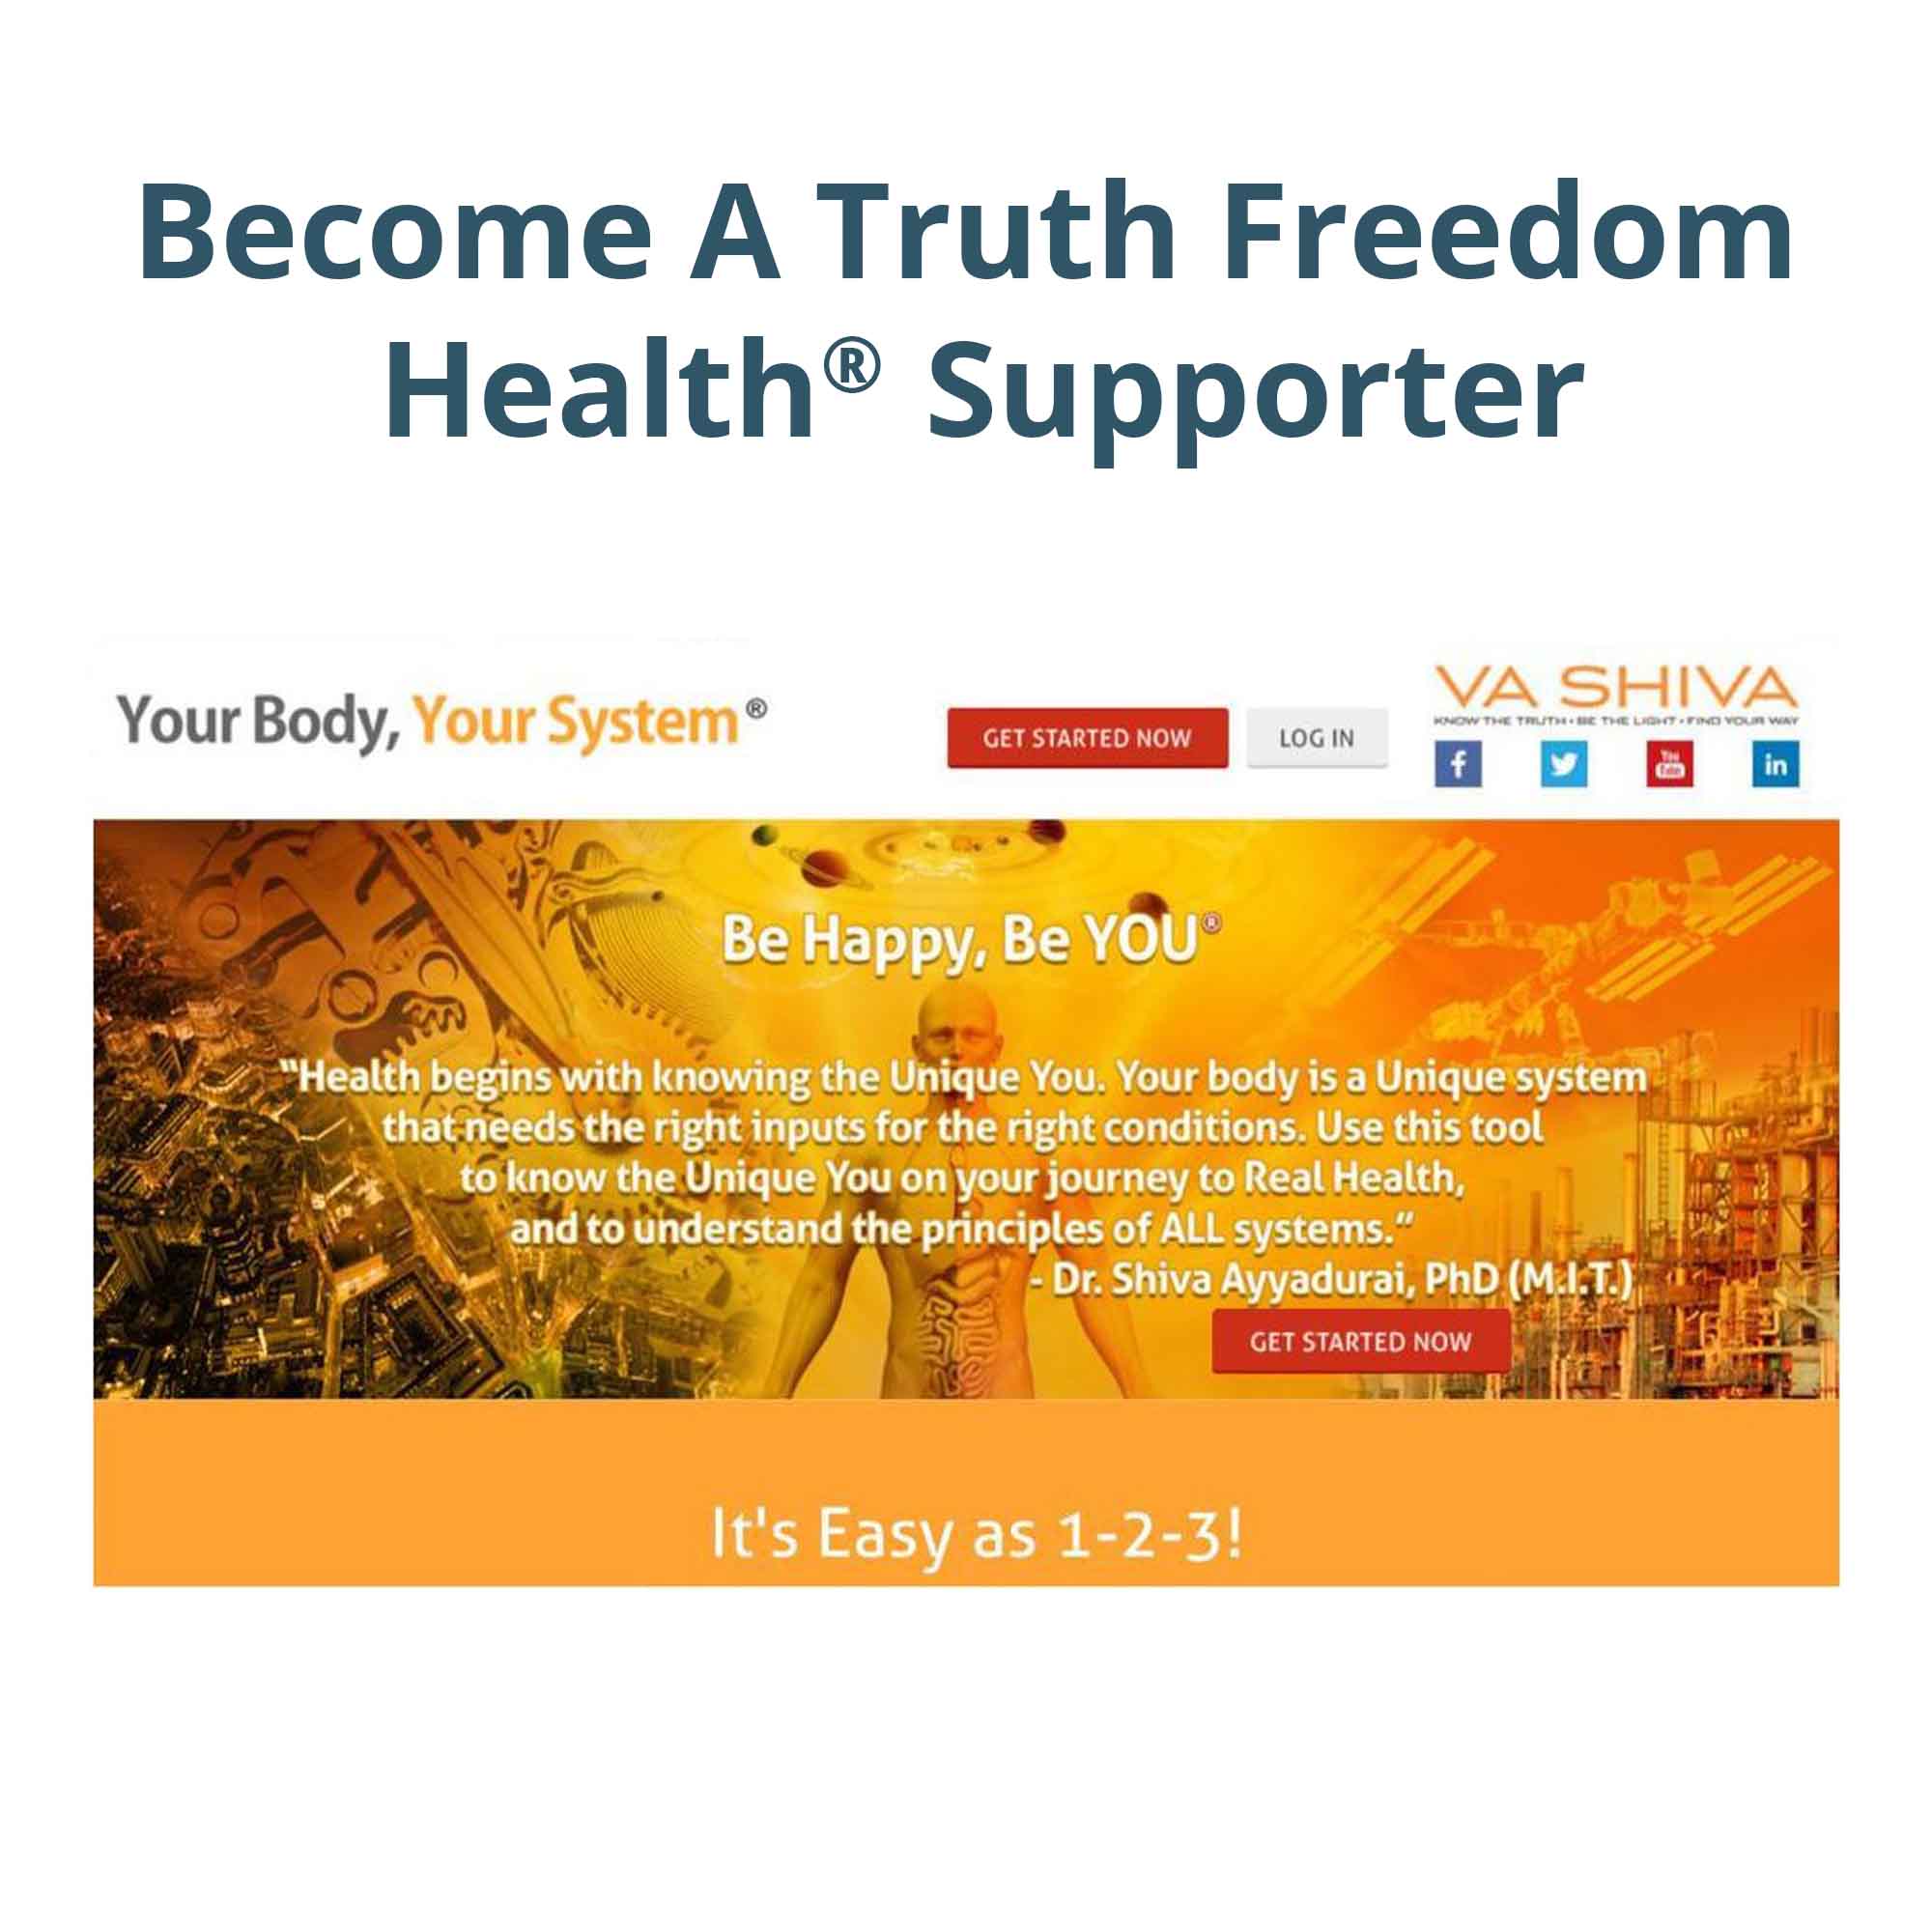 Your Body, Your System™A powerful software tool to know your body as a system.